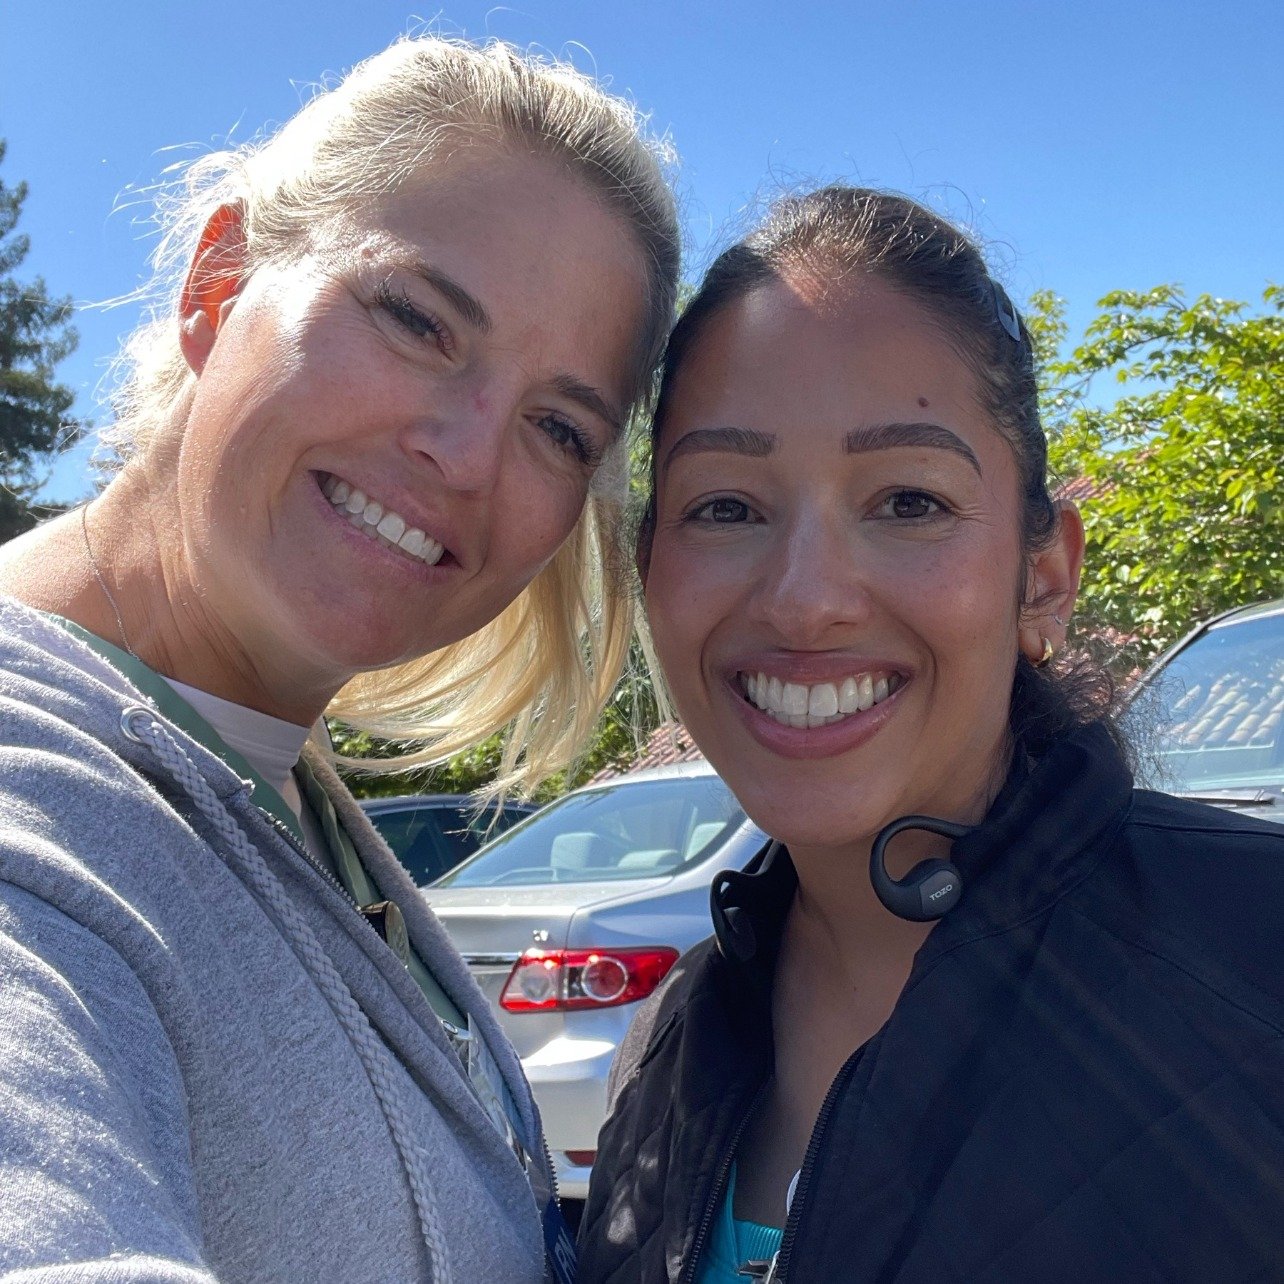 🌟 Out and about with our incredible Amari Home Health Care and Hospice nurse team! 🏥 

Nurse Kristen leading the way, accompanied by our dedicated student nurse, learning and growing under her expert guidance. 💼 From bedside care to community outr